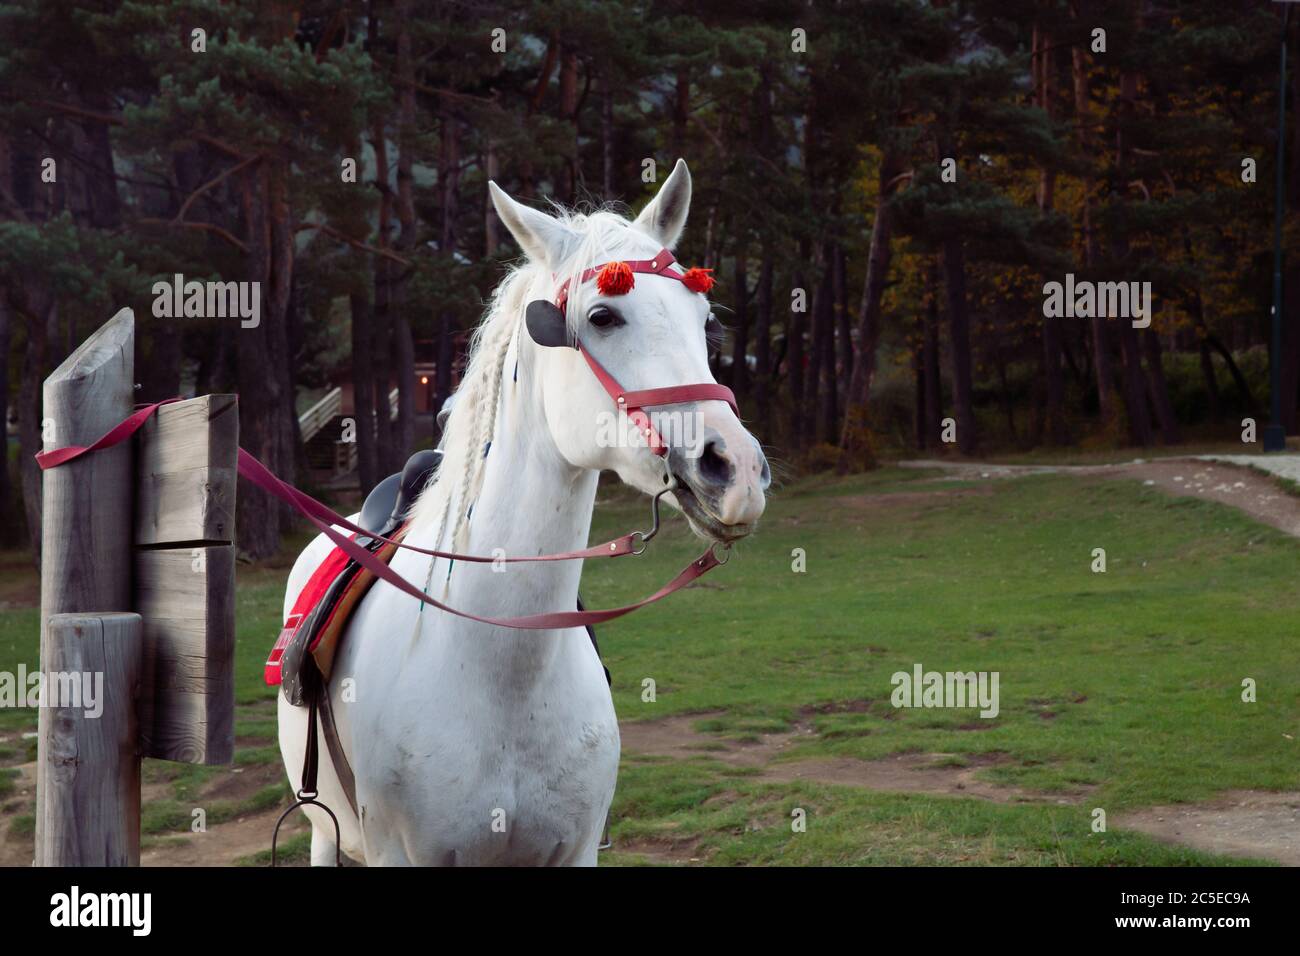 A white beautiful horse wearing a red bridle with ornaments on its browband, tied to a wooden sign in a forest, Abant Lake, Turkey Stock Photo